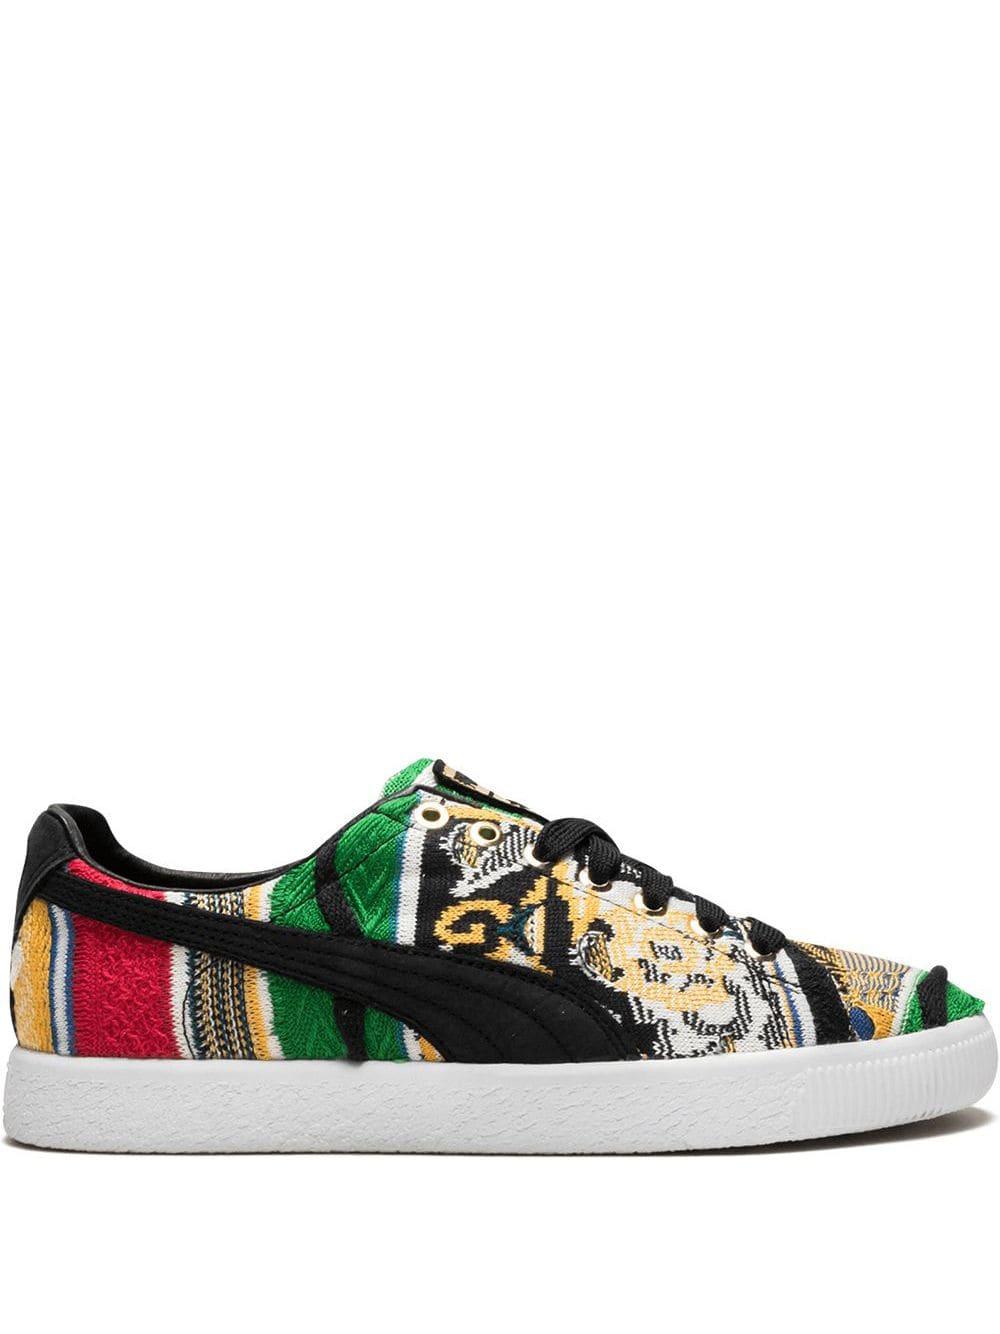 PUMA Clyde Coogi Sneakers in Yellow for Men - Lyst